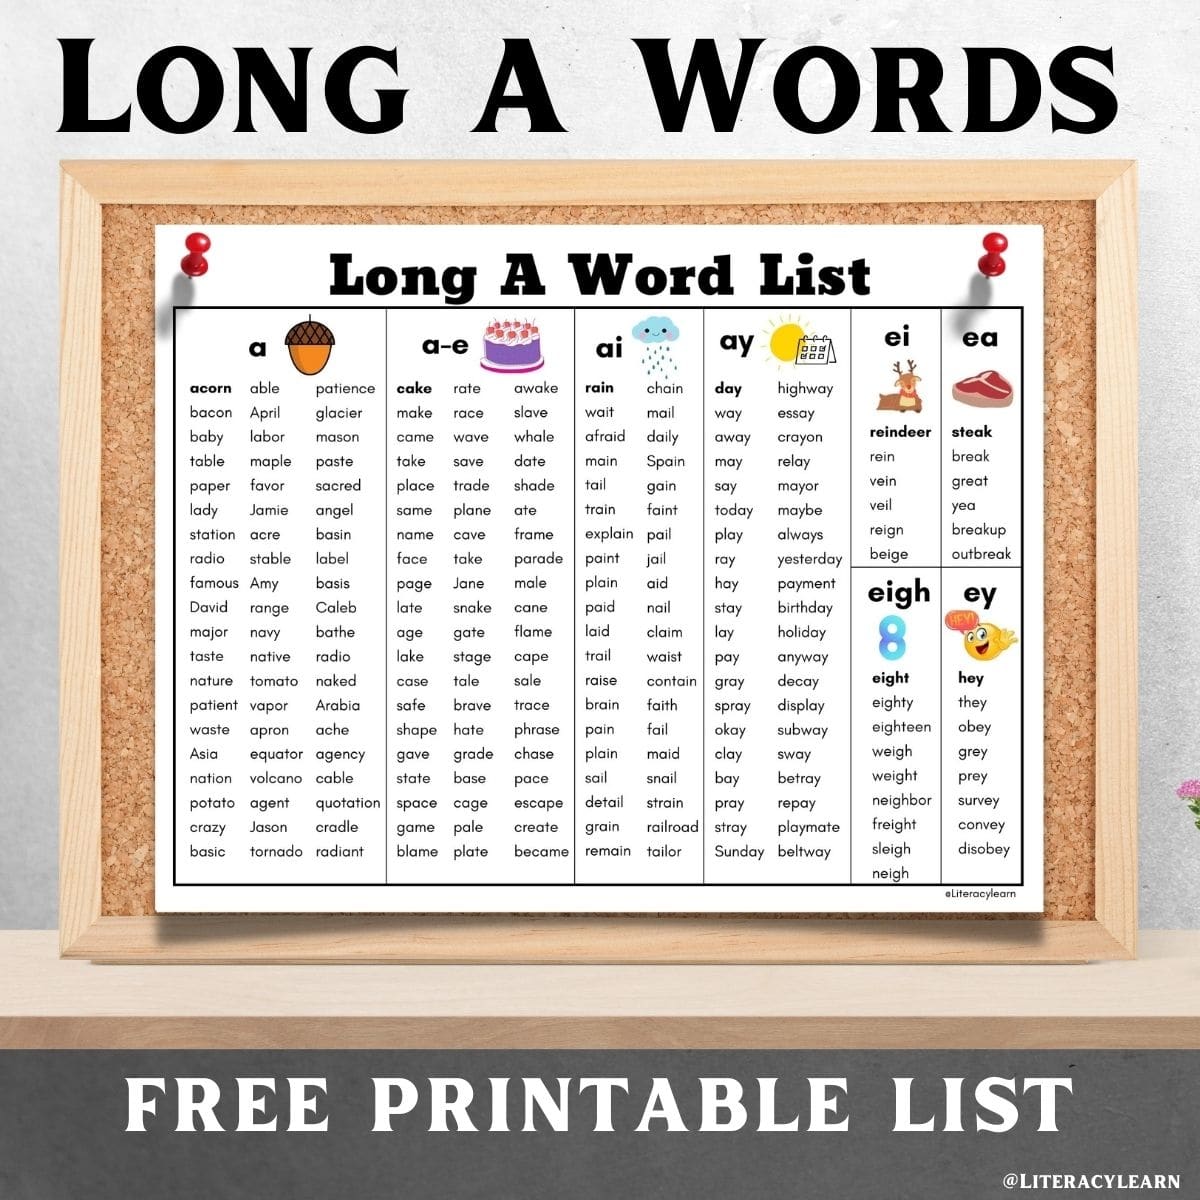 A corkboard with the long vowel list pinned to it. Words saying "Long A Words."